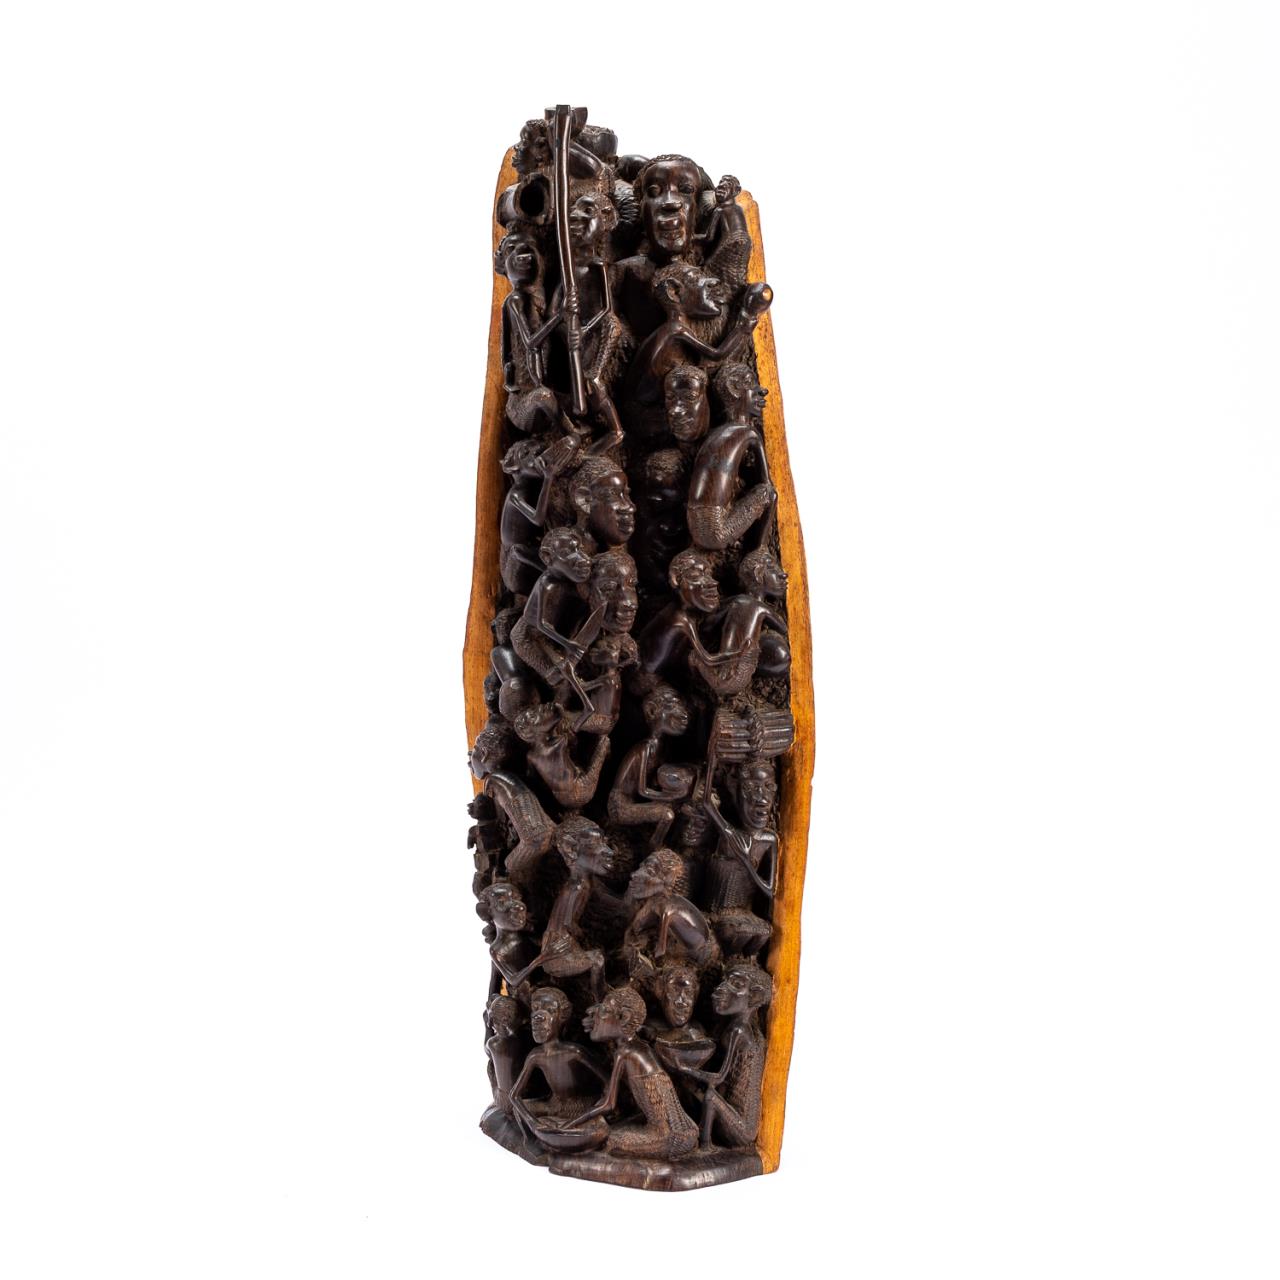 AFRICAN CARVED EBONY FIGURAL HIGH RELIEF